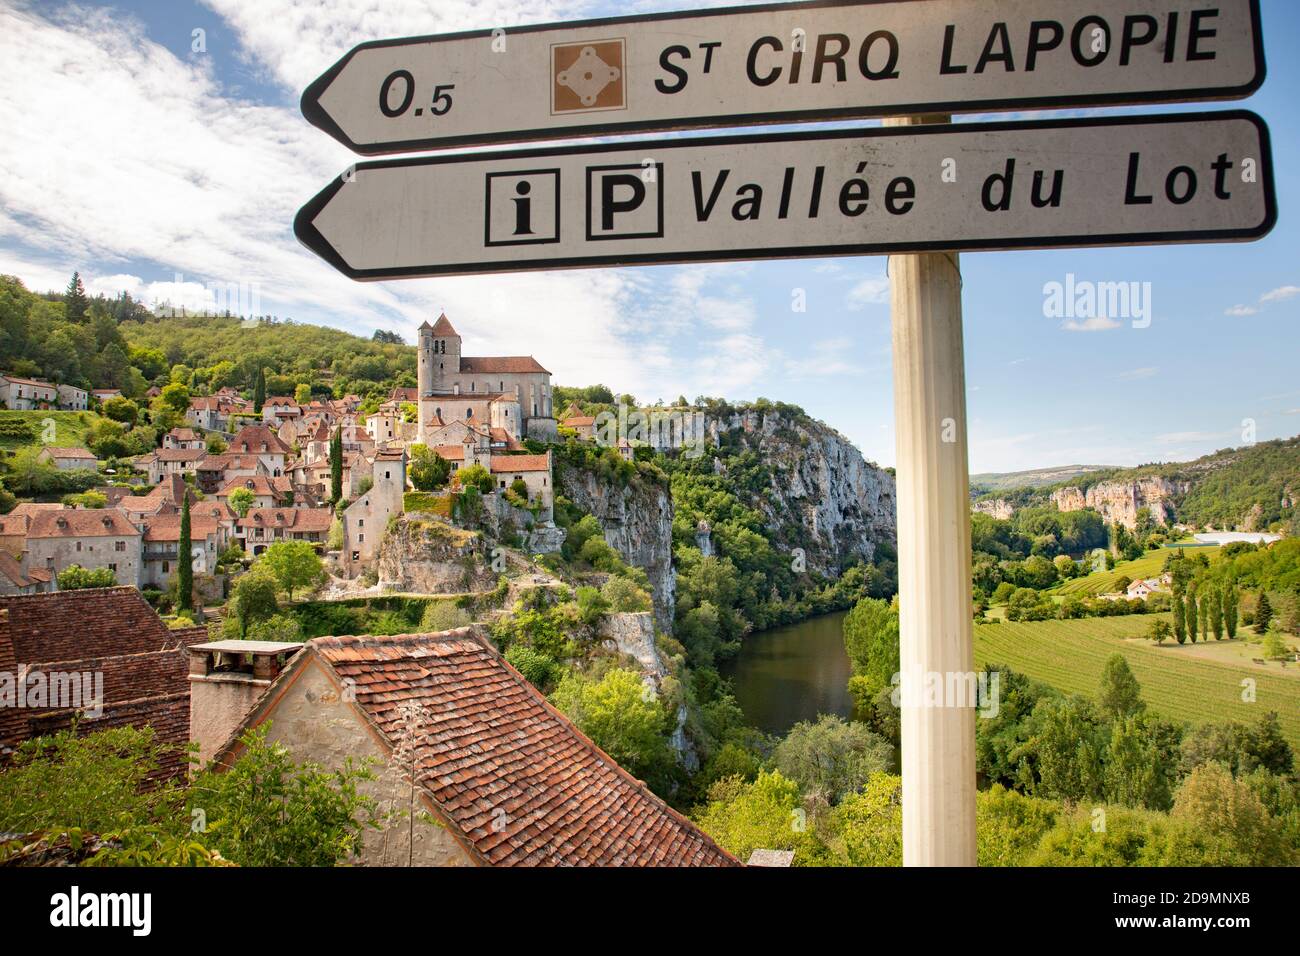 St Cirq Lapopie, poised over the River Lot, was justifiably voted one of the 'most beautiful villages of France'. It is very popular with visitors. Stock Photo